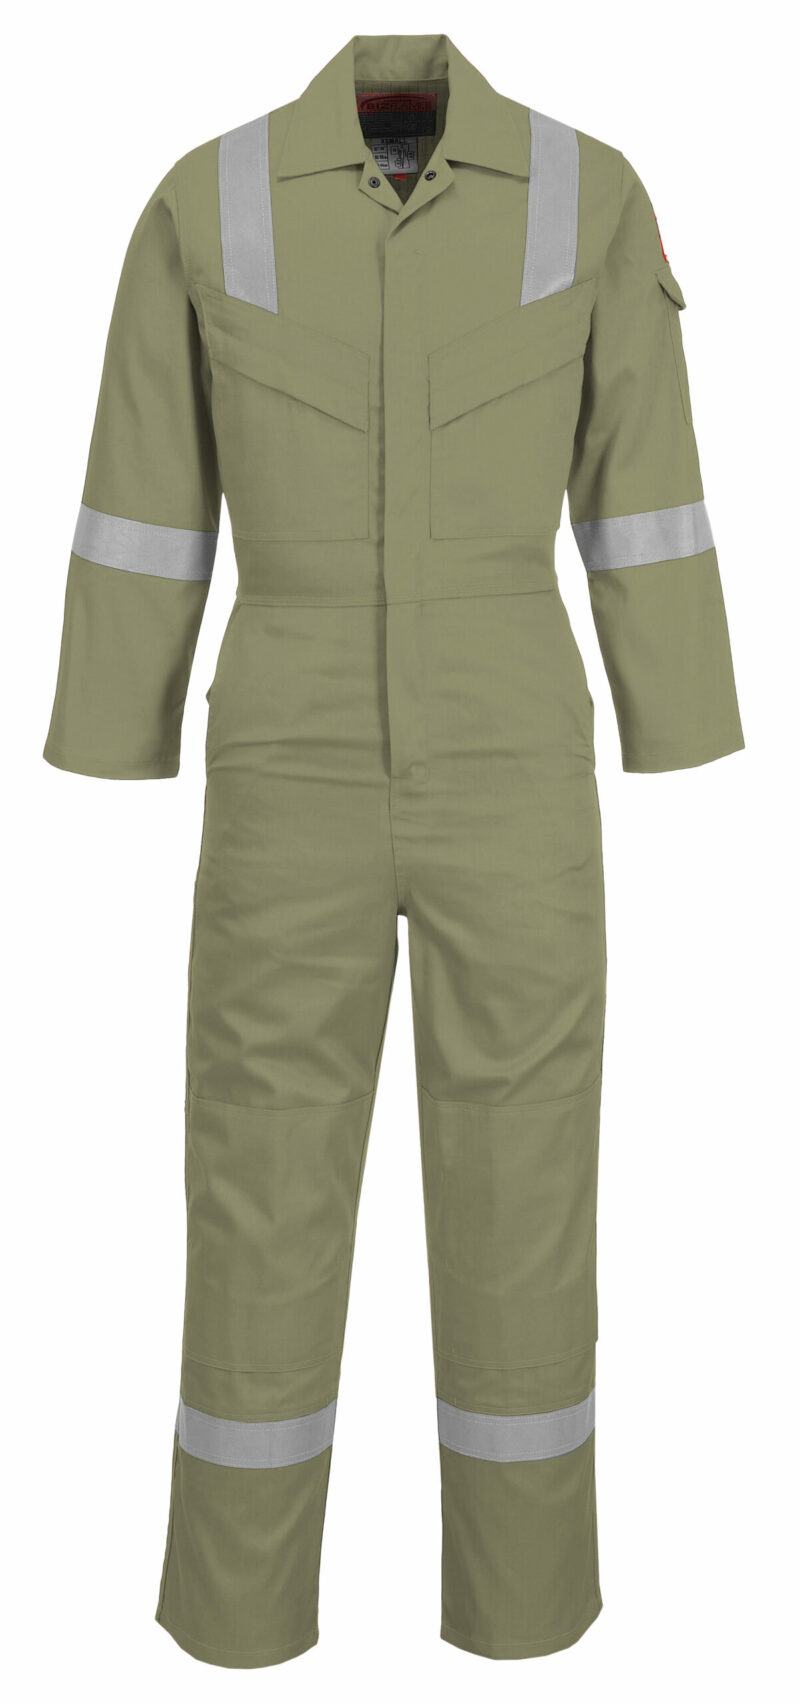 Portwest FR21 Super Light Weight Anti-Static Flame Retardant Coverall-17120